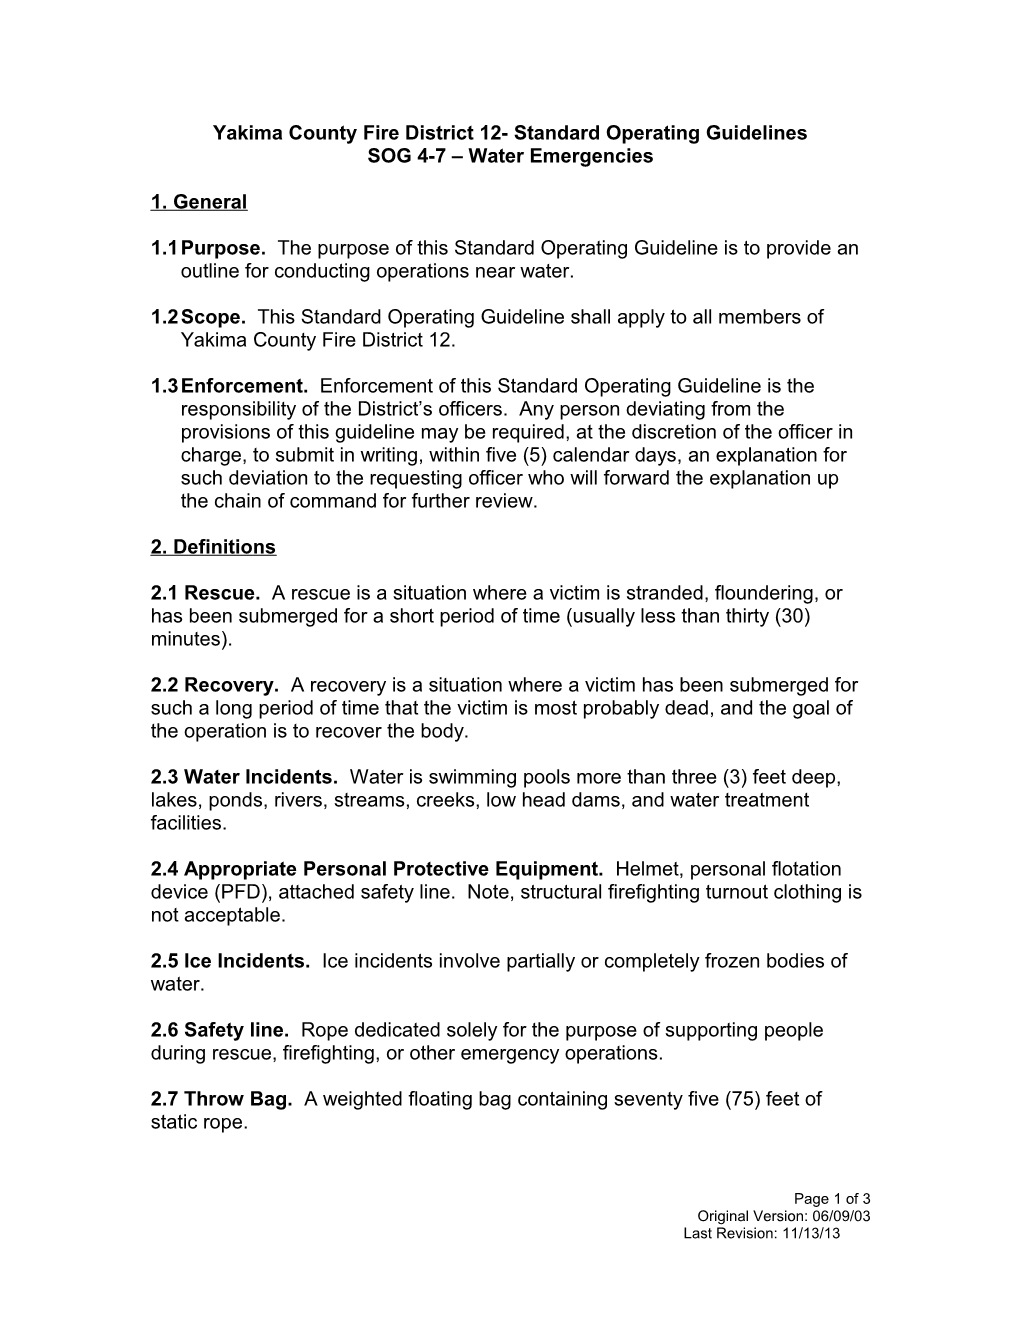 Yakima County Fire District 12- Standard Operating Guidelines s5